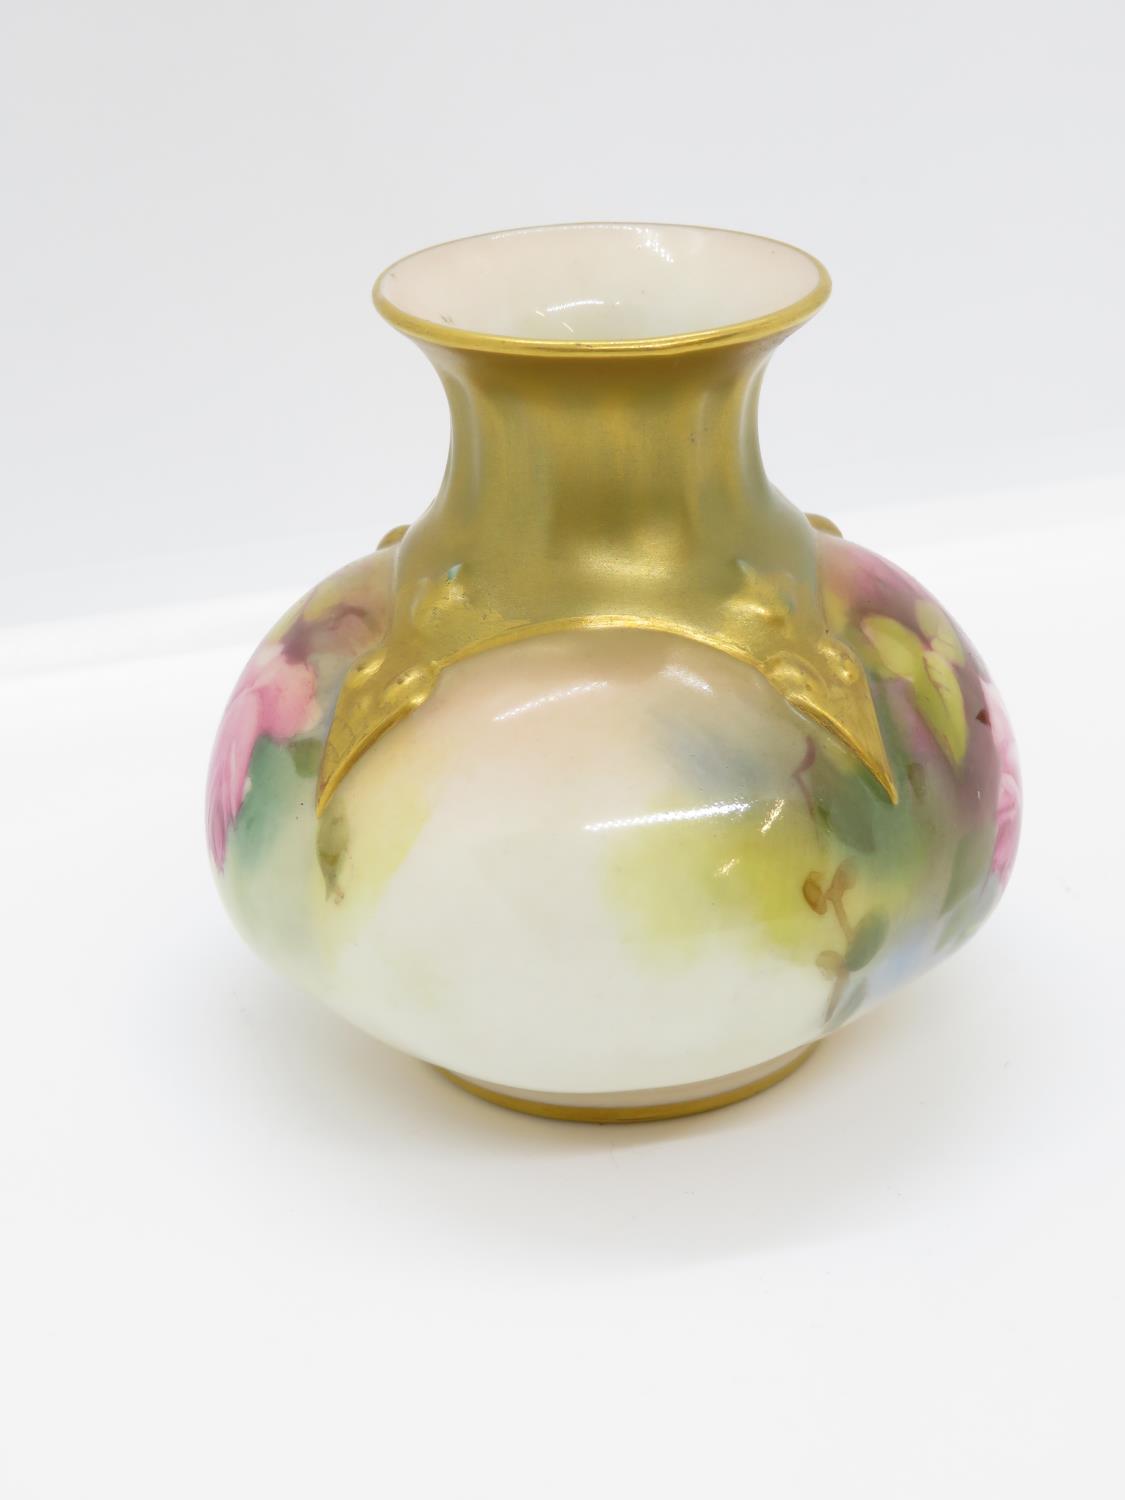 Purple mark model H306 hand painted vase by Royal Worcester 3" high - Image 2 of 4